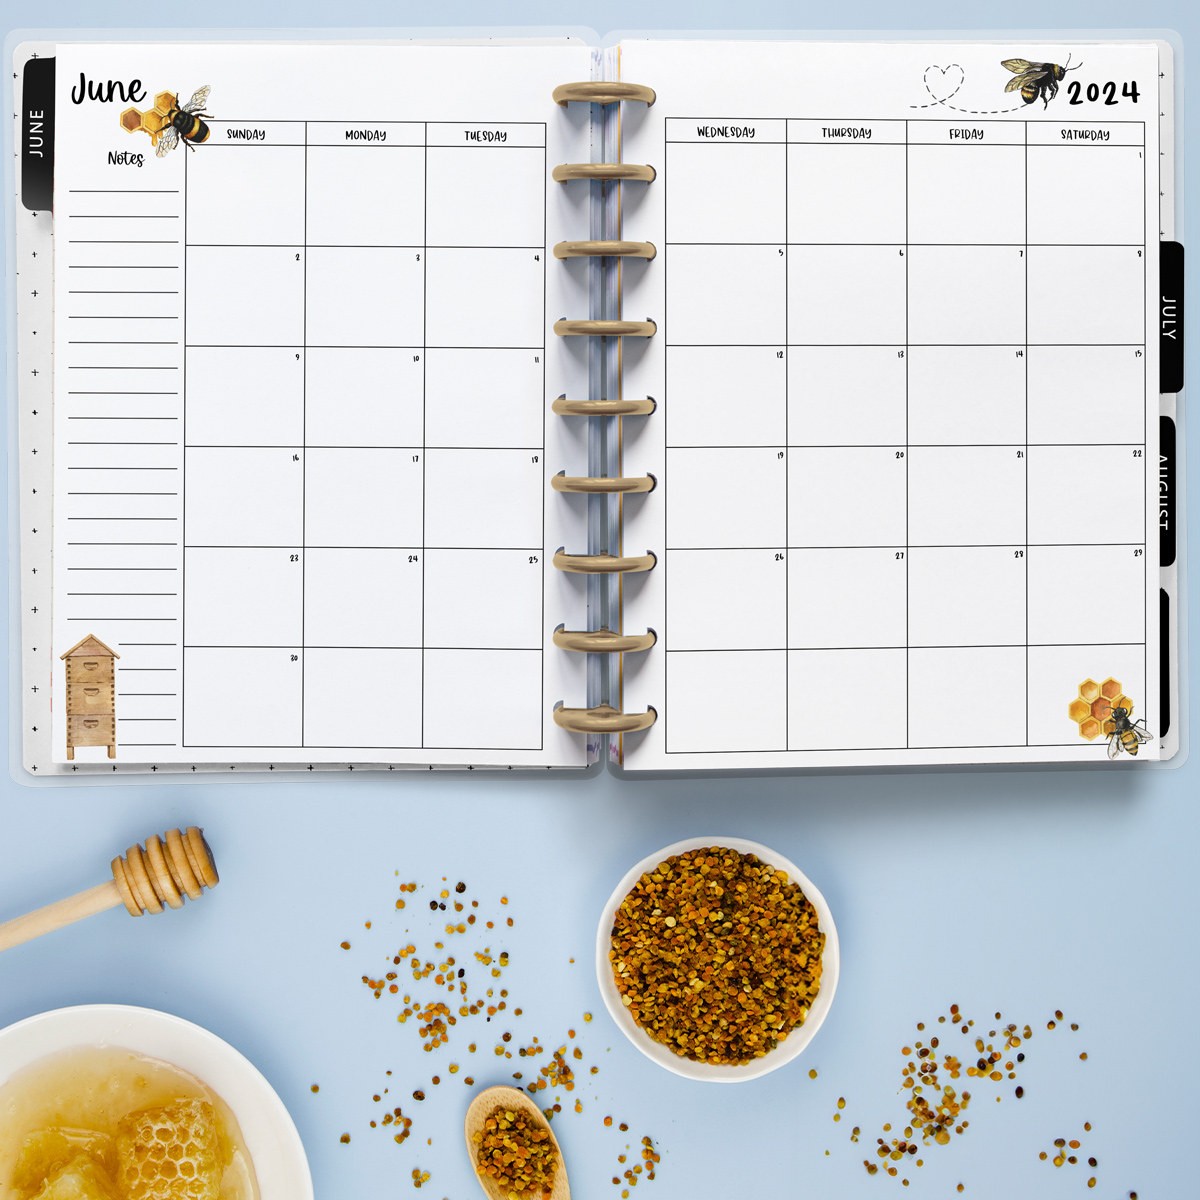 This image is an example of one of the printable 2024 calendar you can get for free at the end of this post. This is showing the month of June inside of an open planner. Below the planner is some honey, seeds, and honey comb.